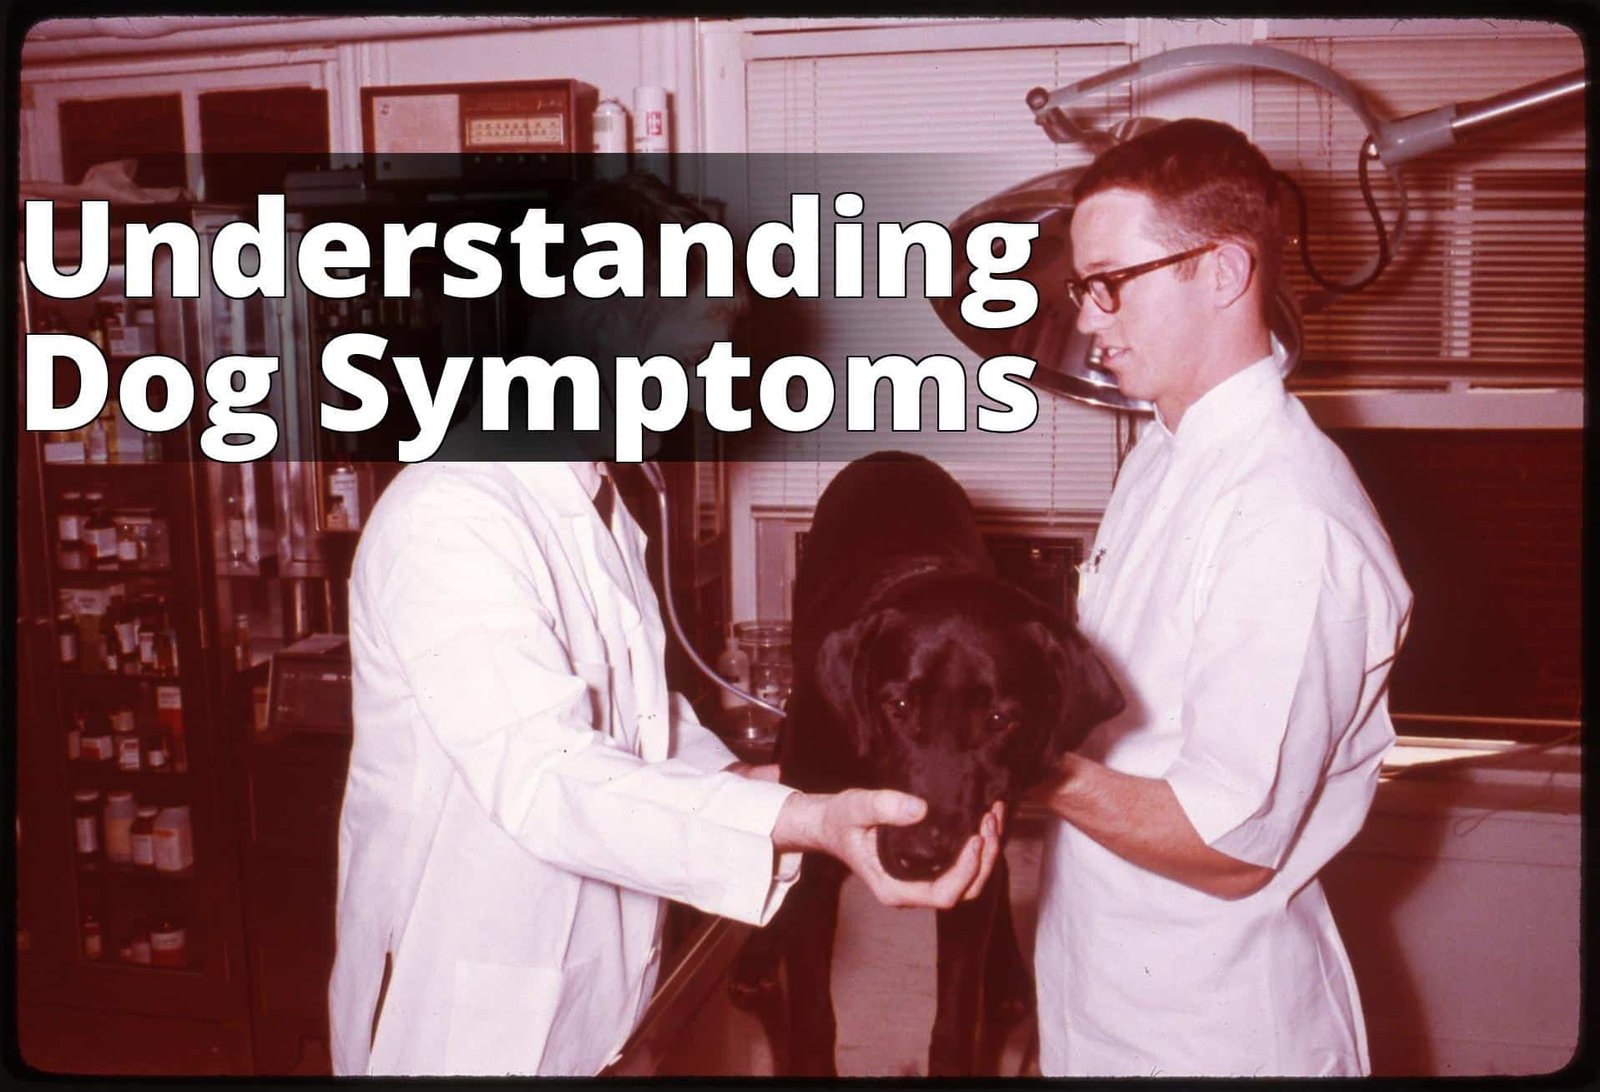 File:Examining a dog (WRAMC DPW 09-3476-1), National Museum of Health and Medicine (5178774984).jpg